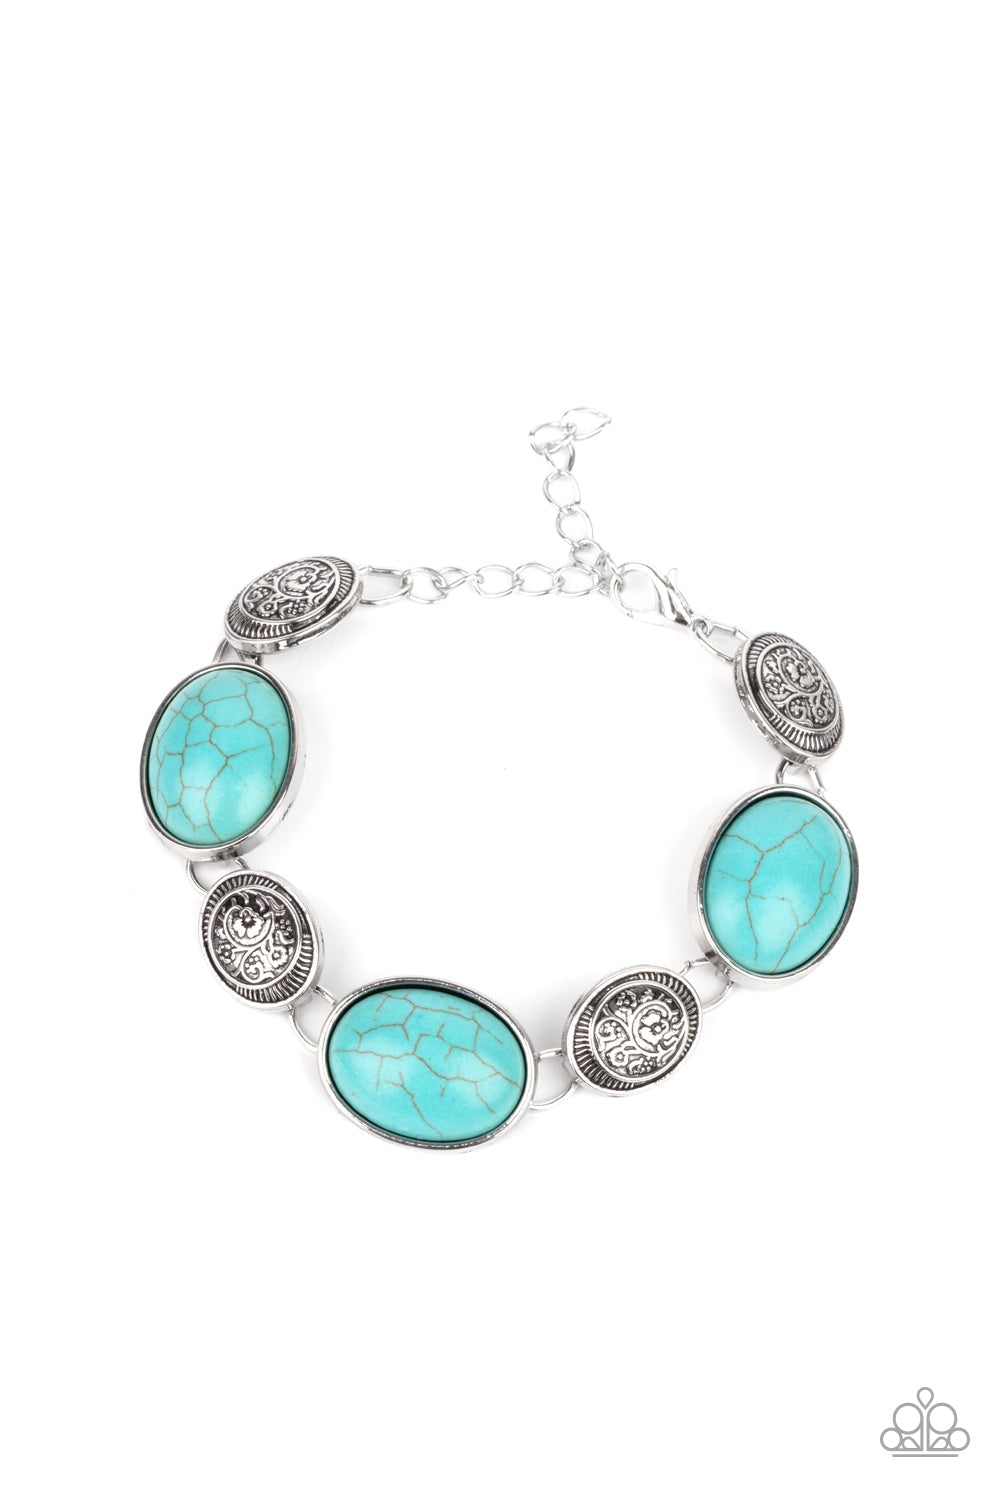 Cactus Country Turquoise Blue Stone Bracelet - Paparazzi Accessories- lightbox - CarasShop.com - $5 Jewelry by Cara Jewels